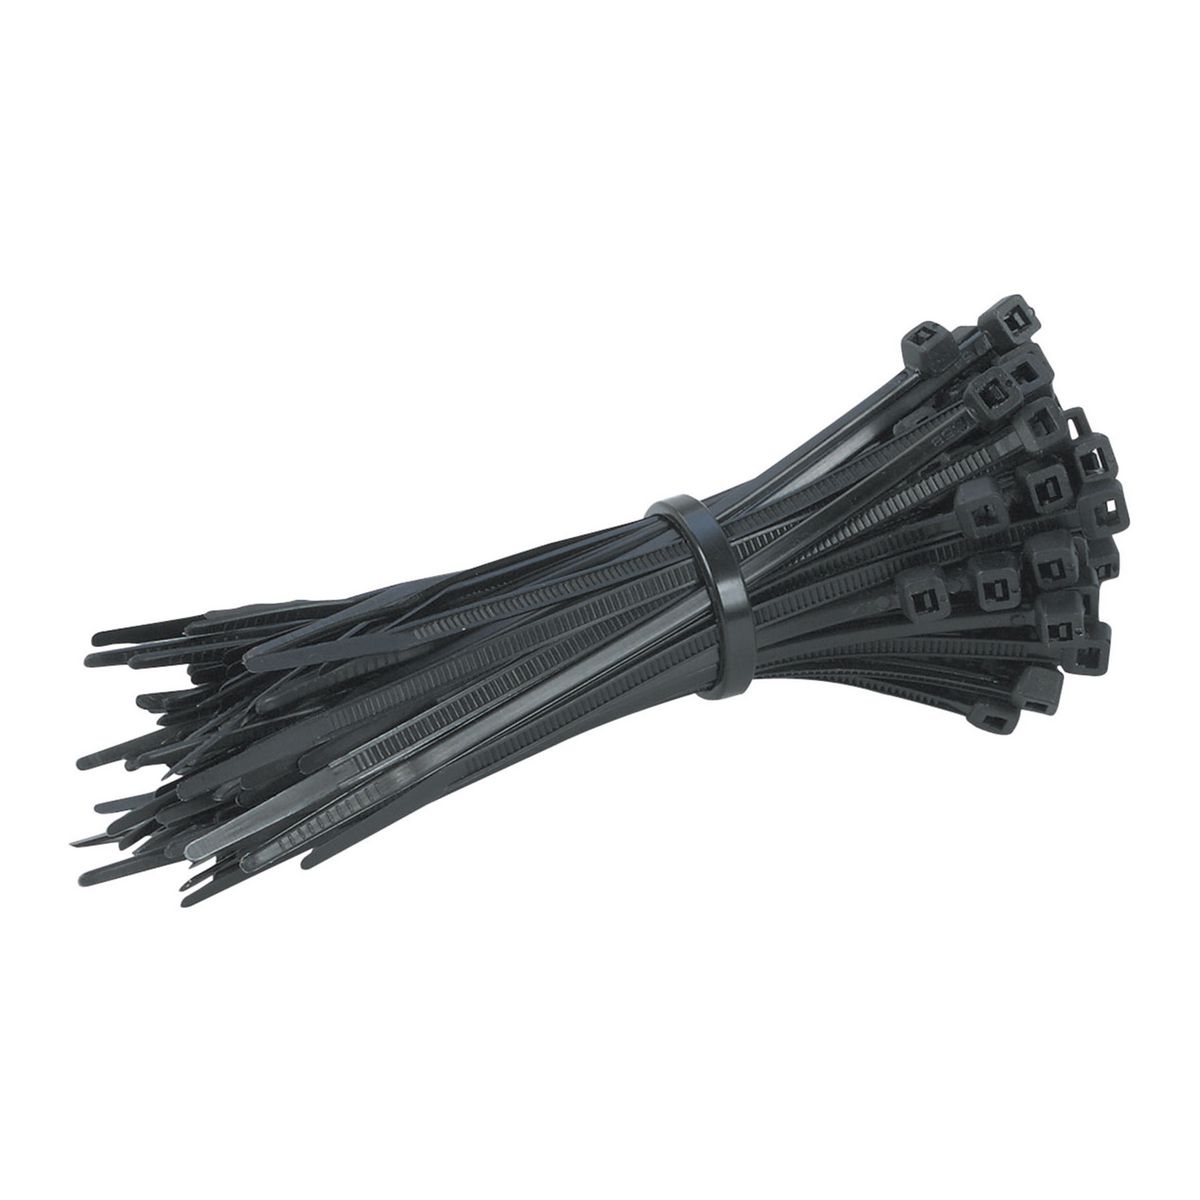 STOREHOUSE 5 in. Black Cable Ties 100 Pk. - Item 60254 / 40687 / 69406